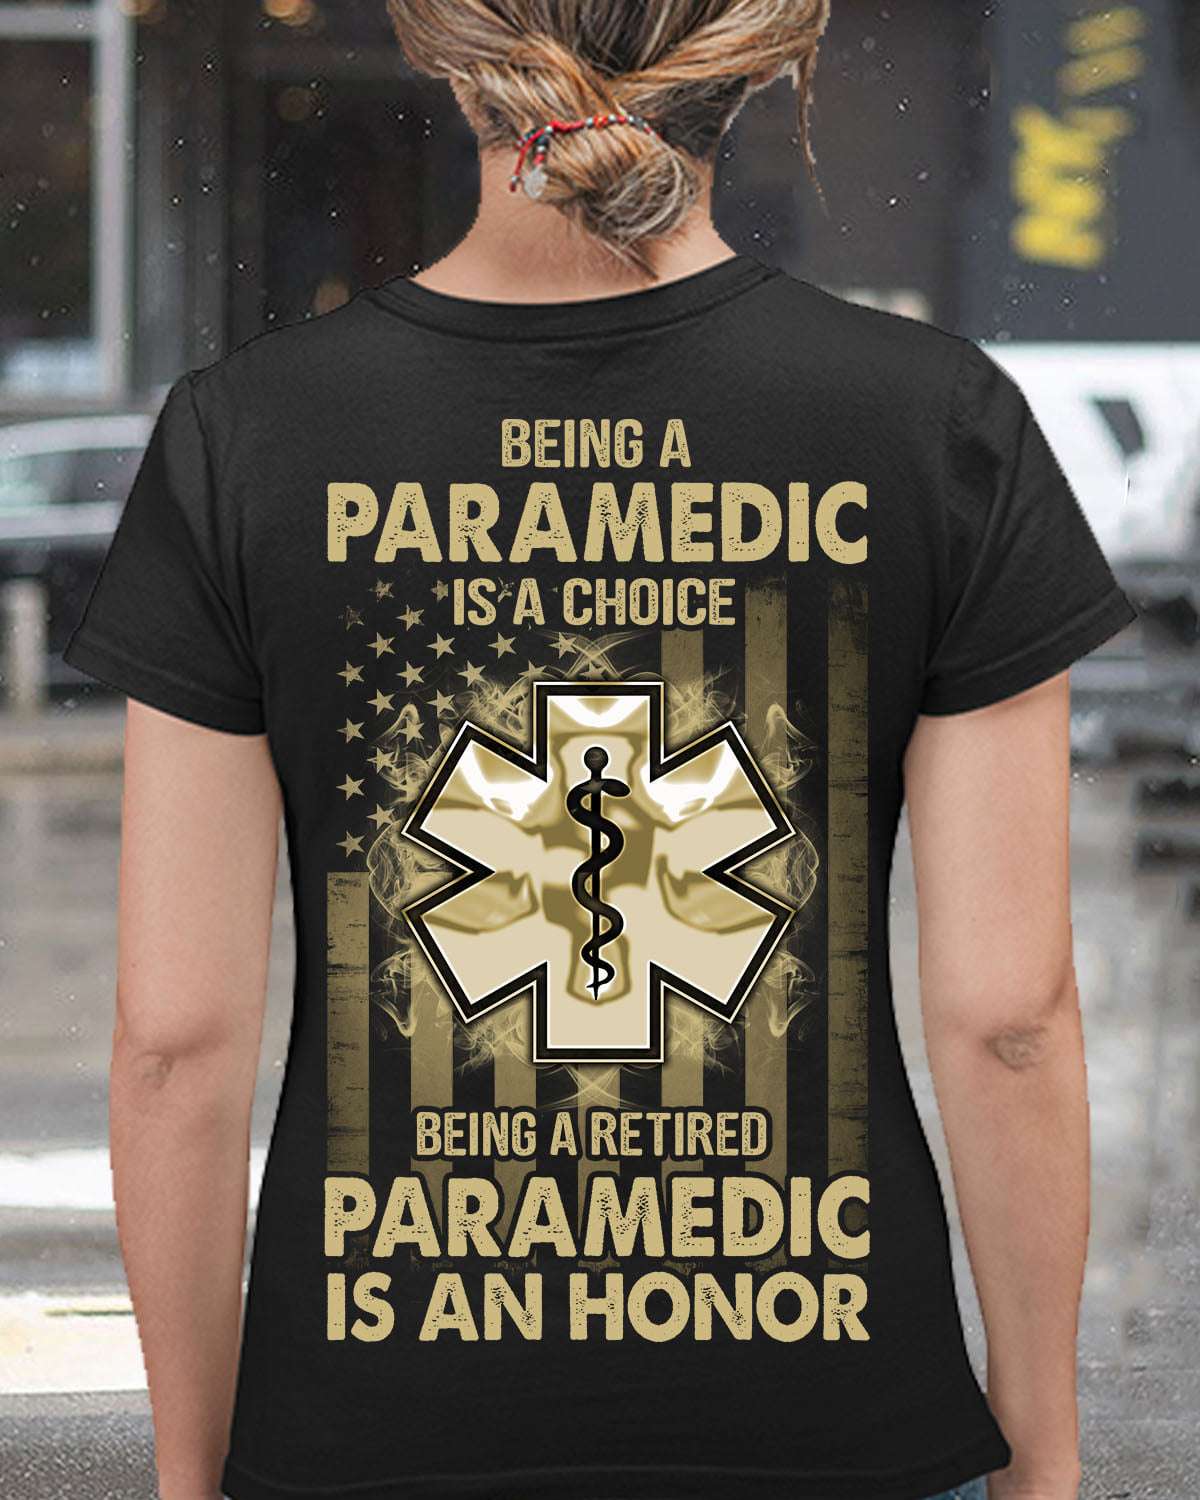 Being a paramedic is a choice being a retired paramedic is an honor ...